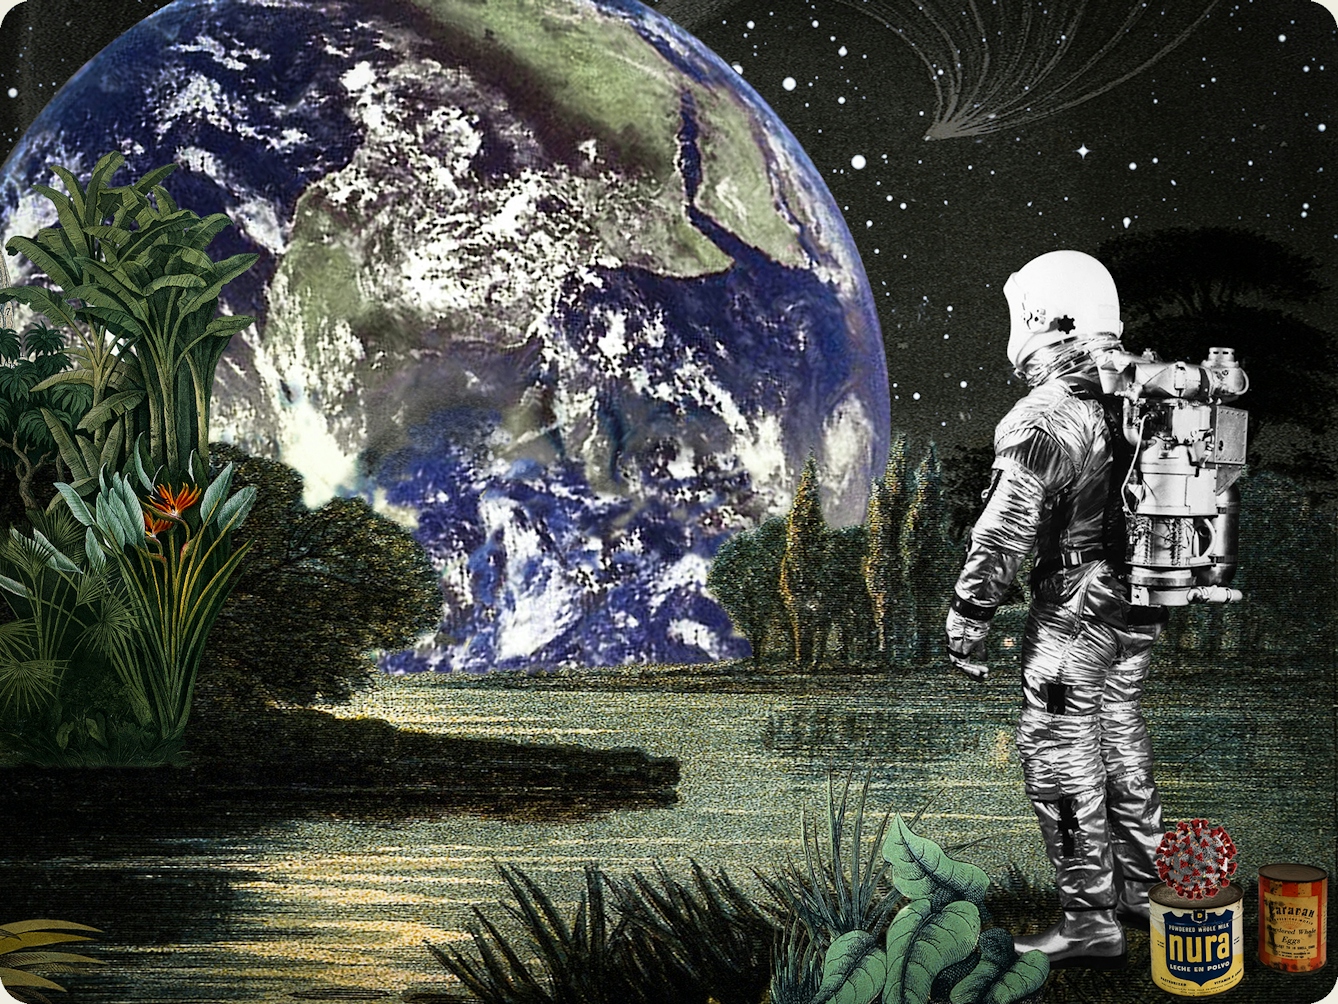 Artwork using collage. The collaged elements are made up of archive material which includes vintage and contemporary photographs, etchings, painted illustrations, lithographic prints and line drawings. This artwork depicts a scene with elements of outer space. In the background is a dark starry sky with a large blue and green planet Earth rising over horizon. In the middle distance on the left hand side is green foliage next to an expanse of lake-like water. In the foreground on the right hand side is a lone astronaut looking out across the water towards the rising Earth. At the feet of the astronauts are a couple of food cans, one with the words 'Powdered whole milk, Nura' written on the side. On top of this can is a molecular representation of the Covid-19 virus. 